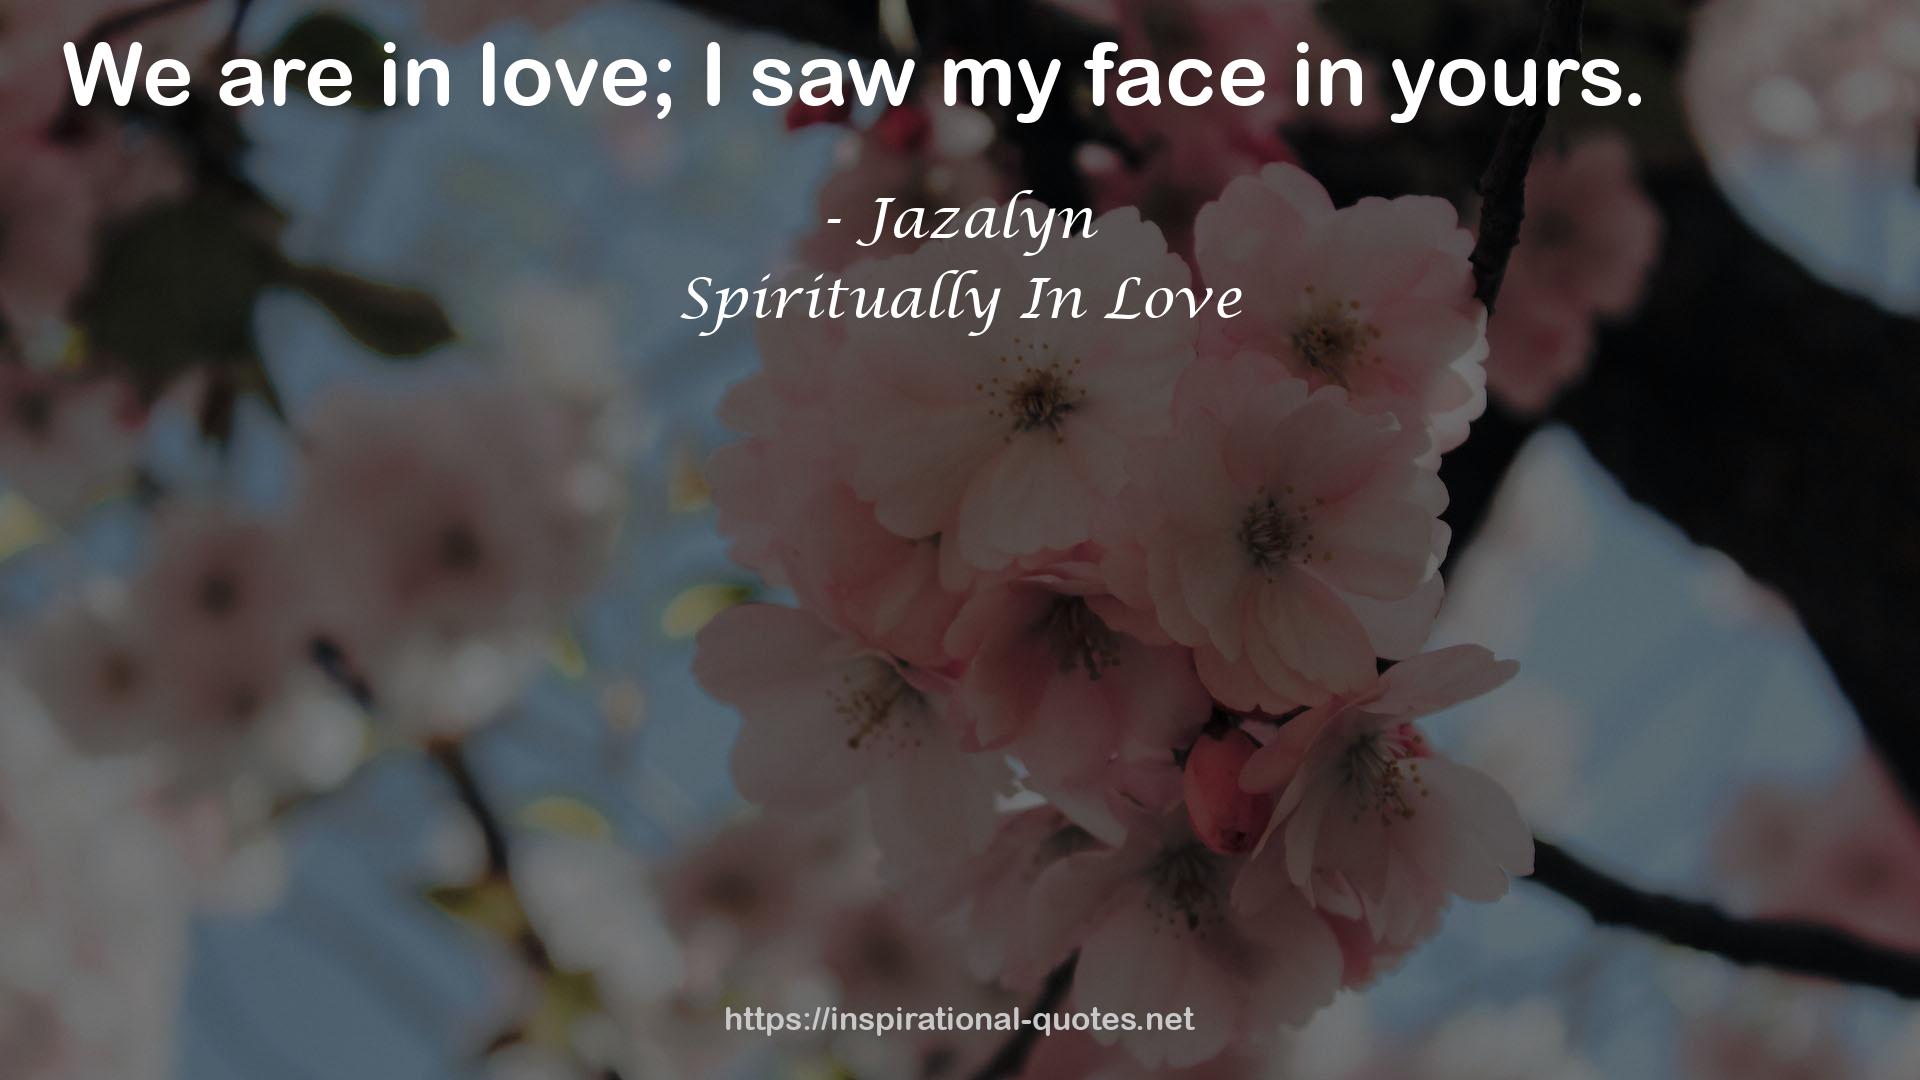 Spiritually In Love QUOTES